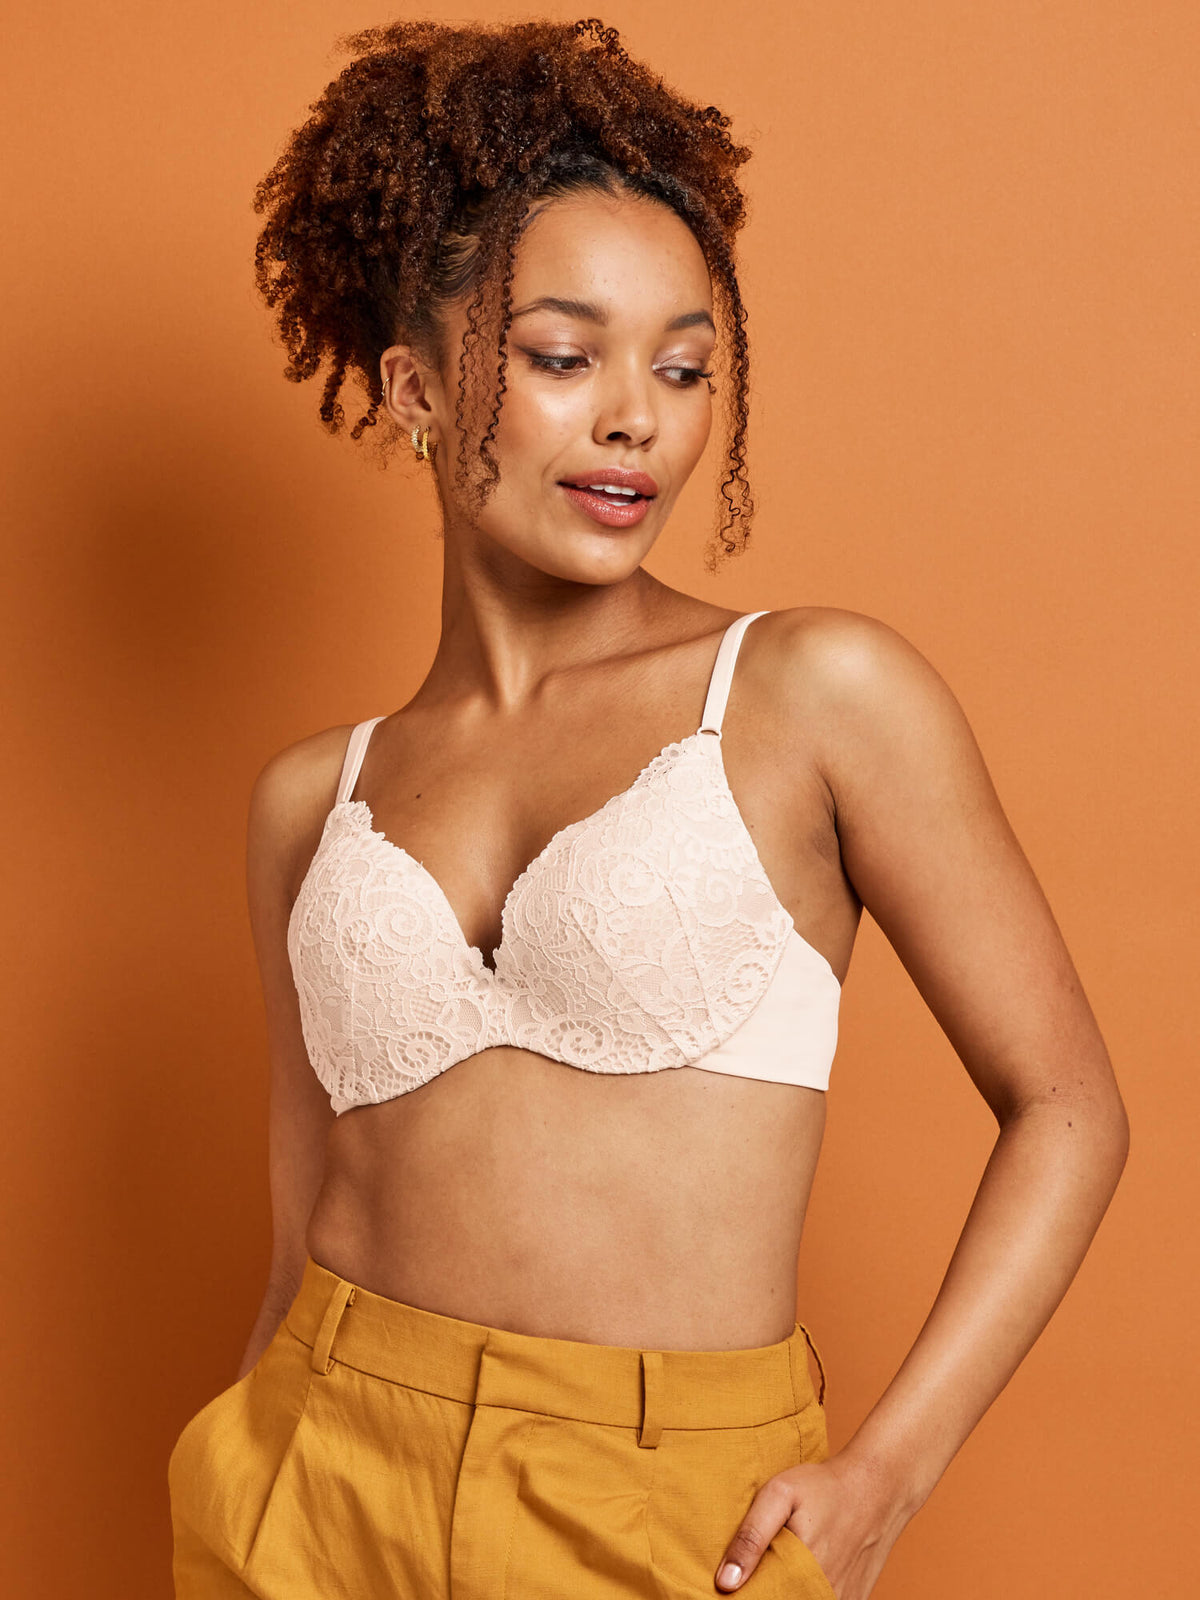 Be Real Lace Push Up Bra